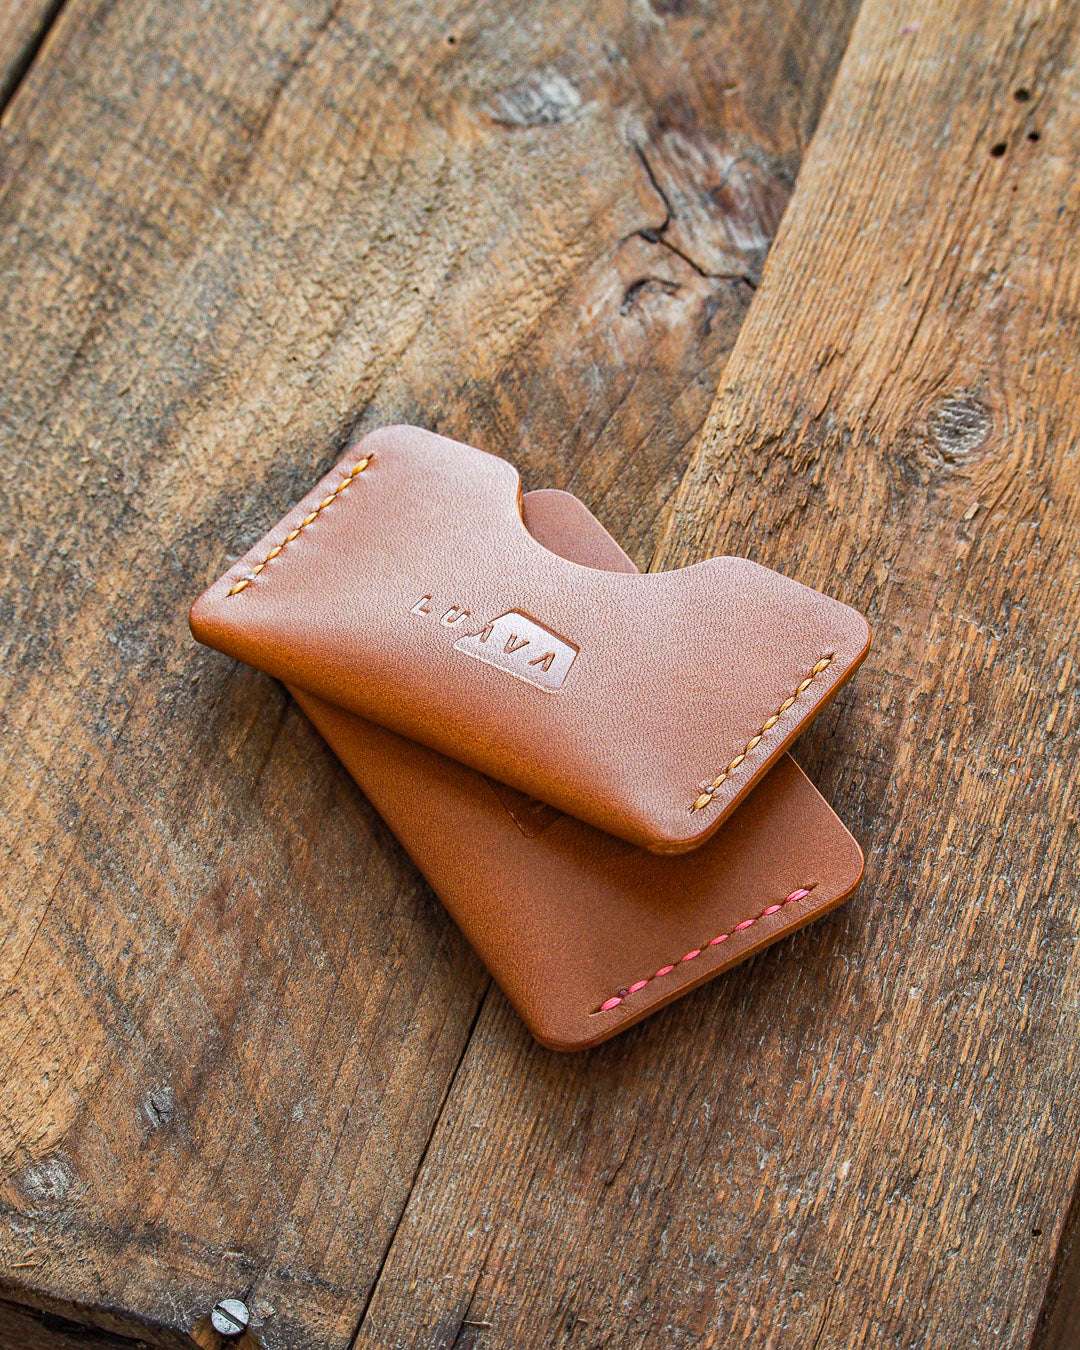 Luava handmade leather wallet handcrafted card holder cardholder made in finland absolute gold koala angle both